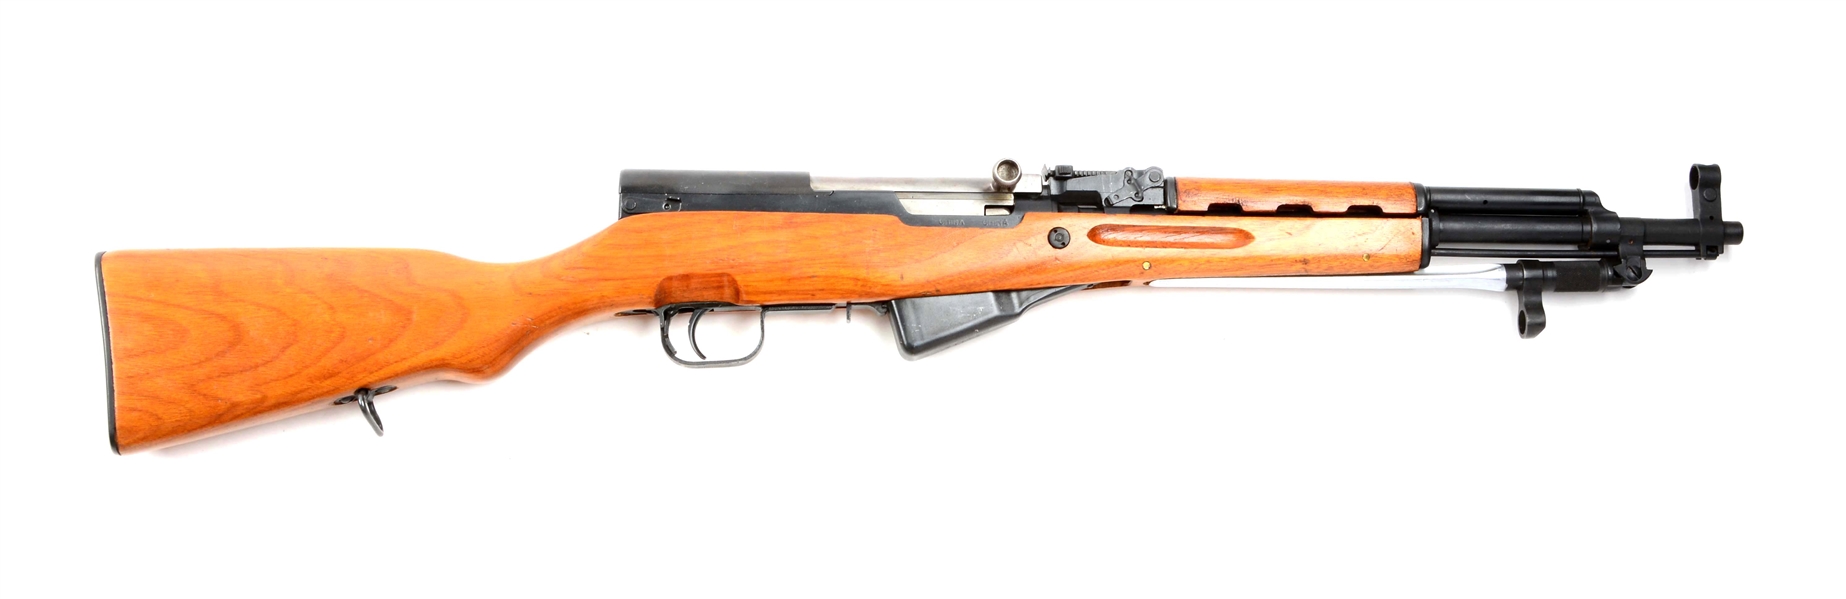 (C) CHINESE SKS CARBINE.